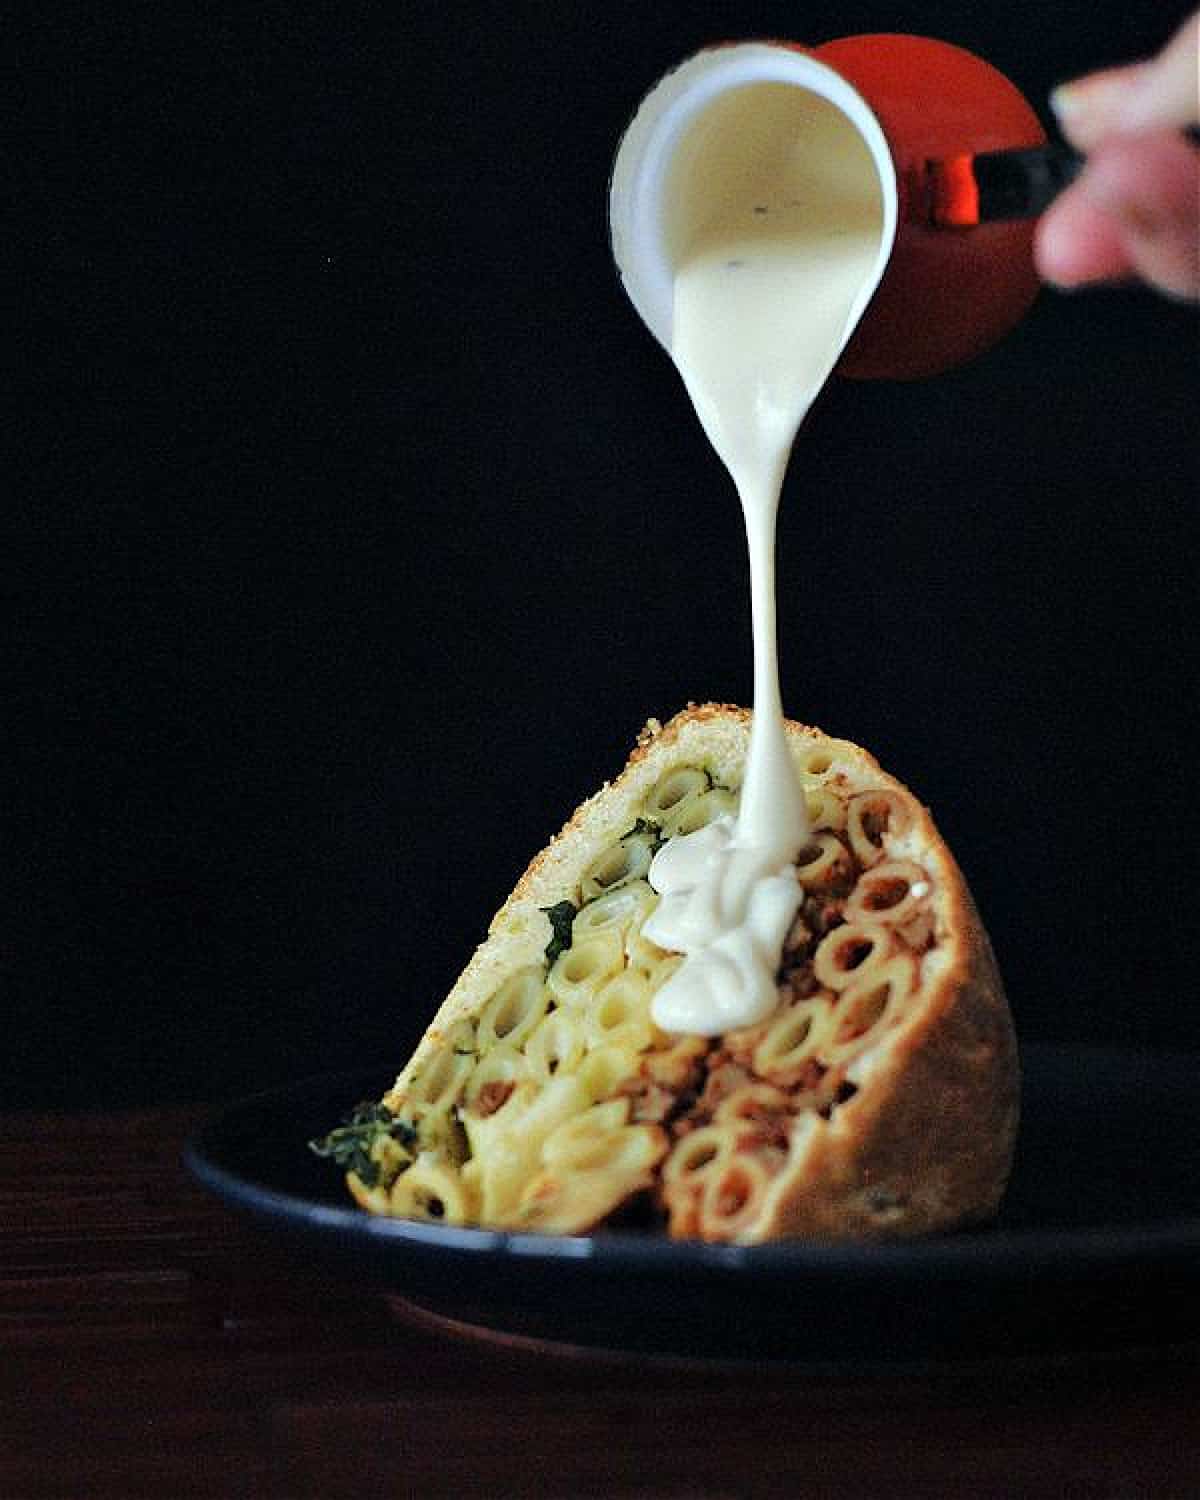 A hand pouring Alfredo sauce over a single serving of timpano against a black background. Timpano is a large pastry dome filled with pasta: a red marinara layer of penne pasta on top, a middle layer of white Alfredo pasta, and a bottom layer of green pesto pasta.